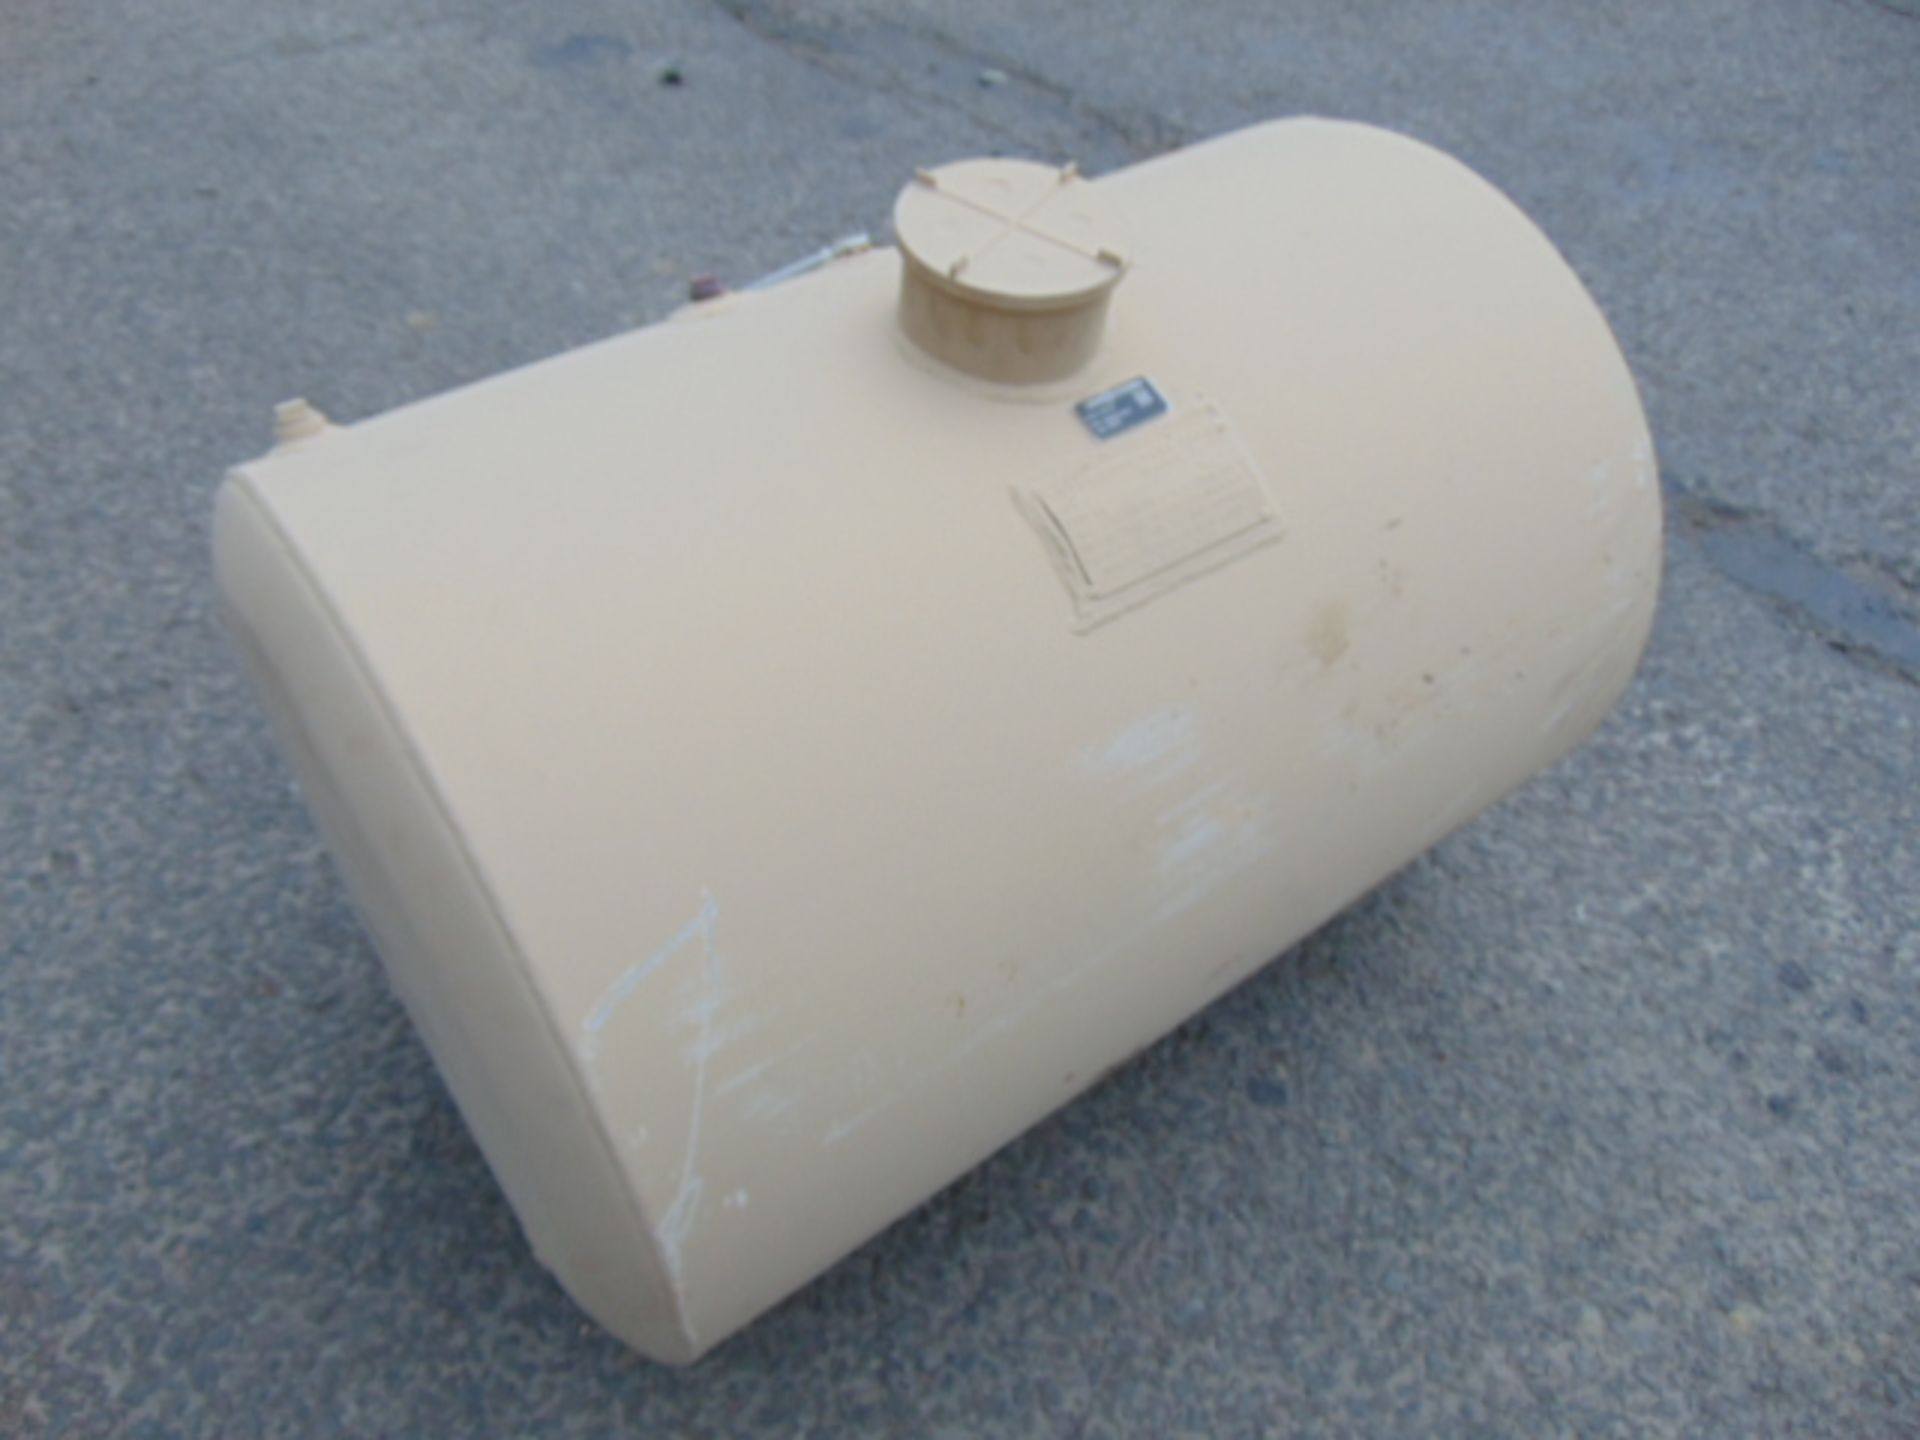 6 x Unissued Heavy Duty 51 US gall Automotive Fuel Tanks - Image 4 of 6